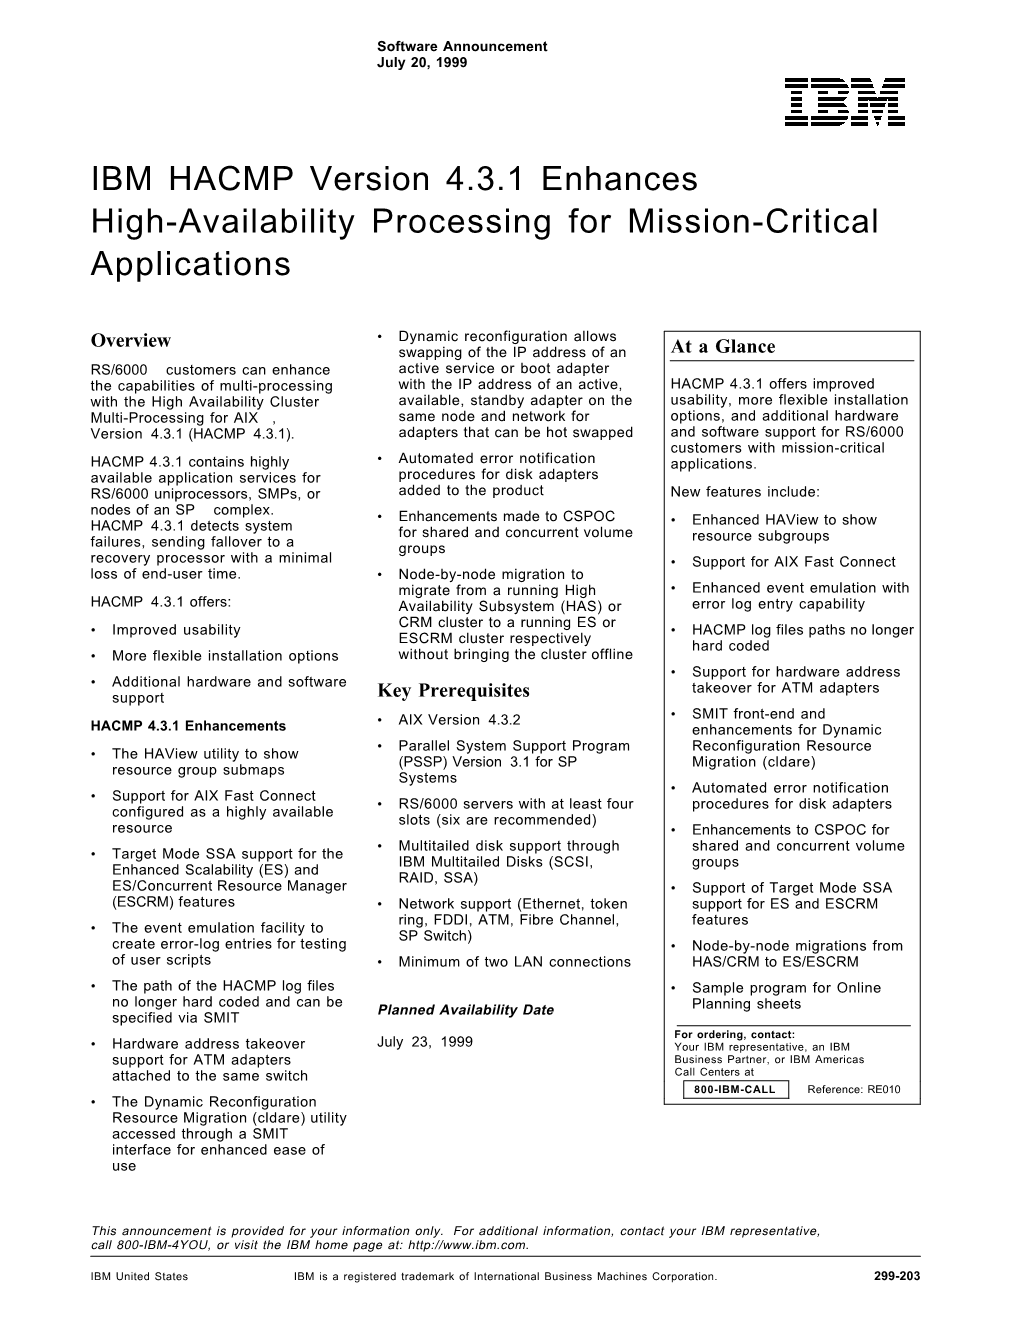 IBM HACMP Version 4.3.1 Enhances High-Availability Processing for Mission-Critical Applications